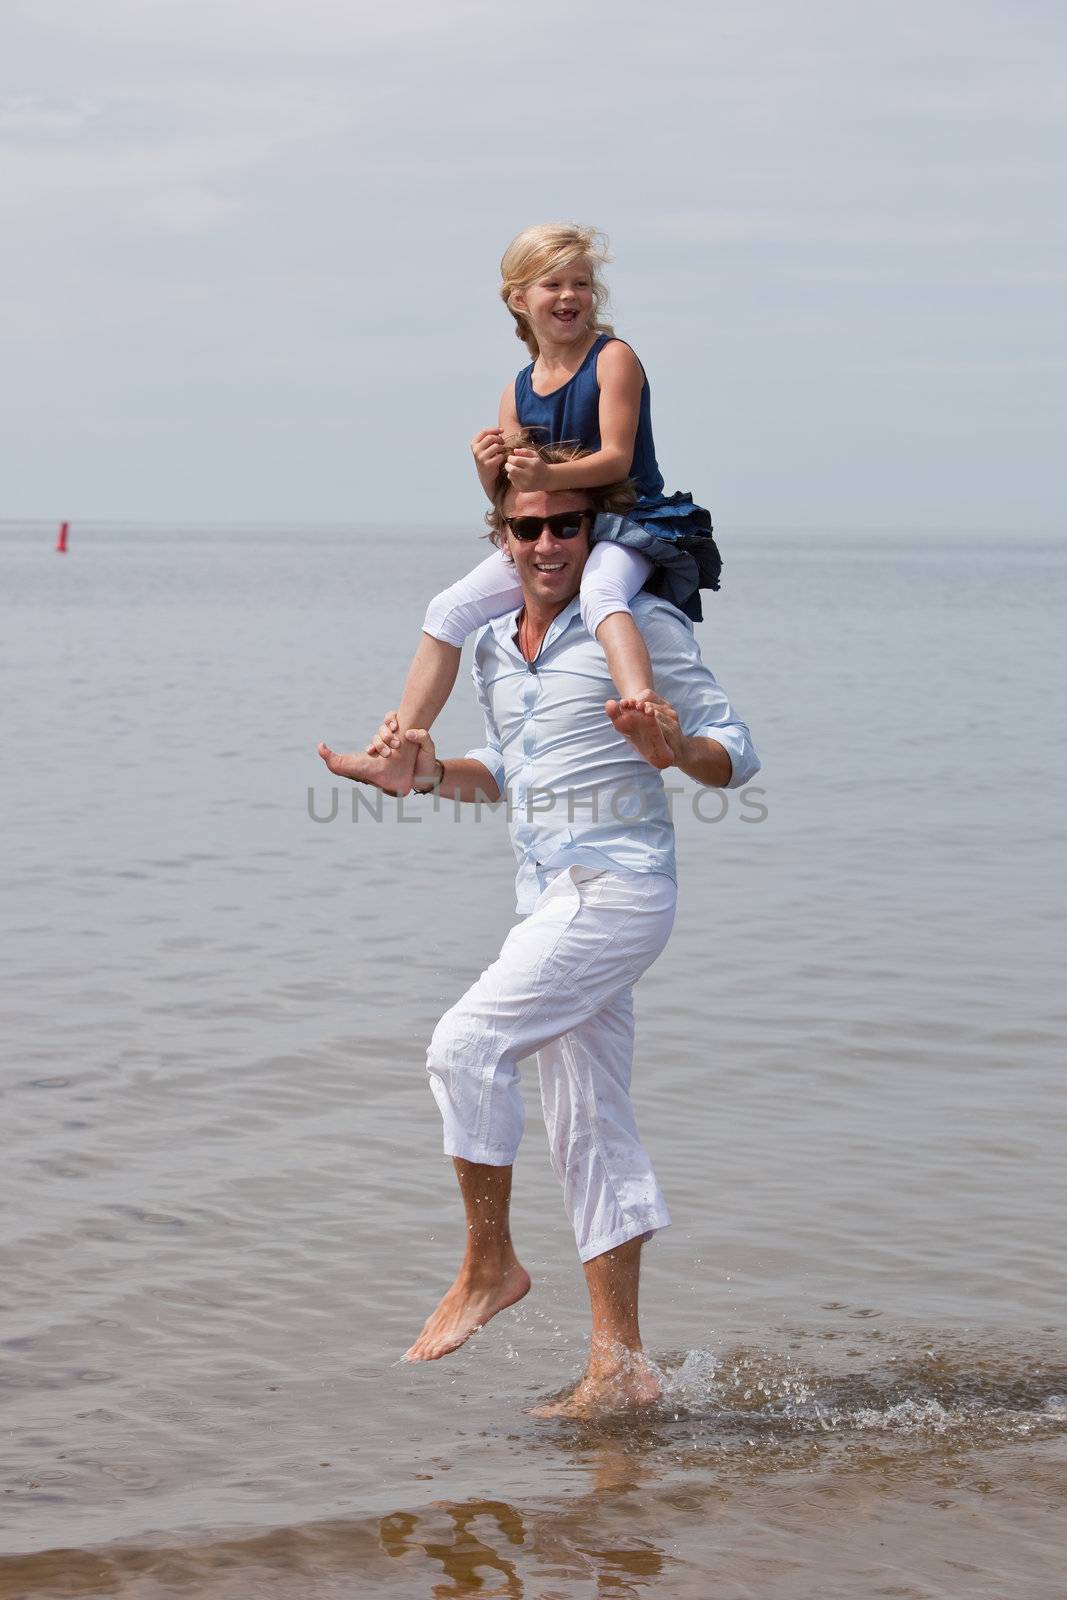 Young girl sitting on dad's shoulders who is running around in the water